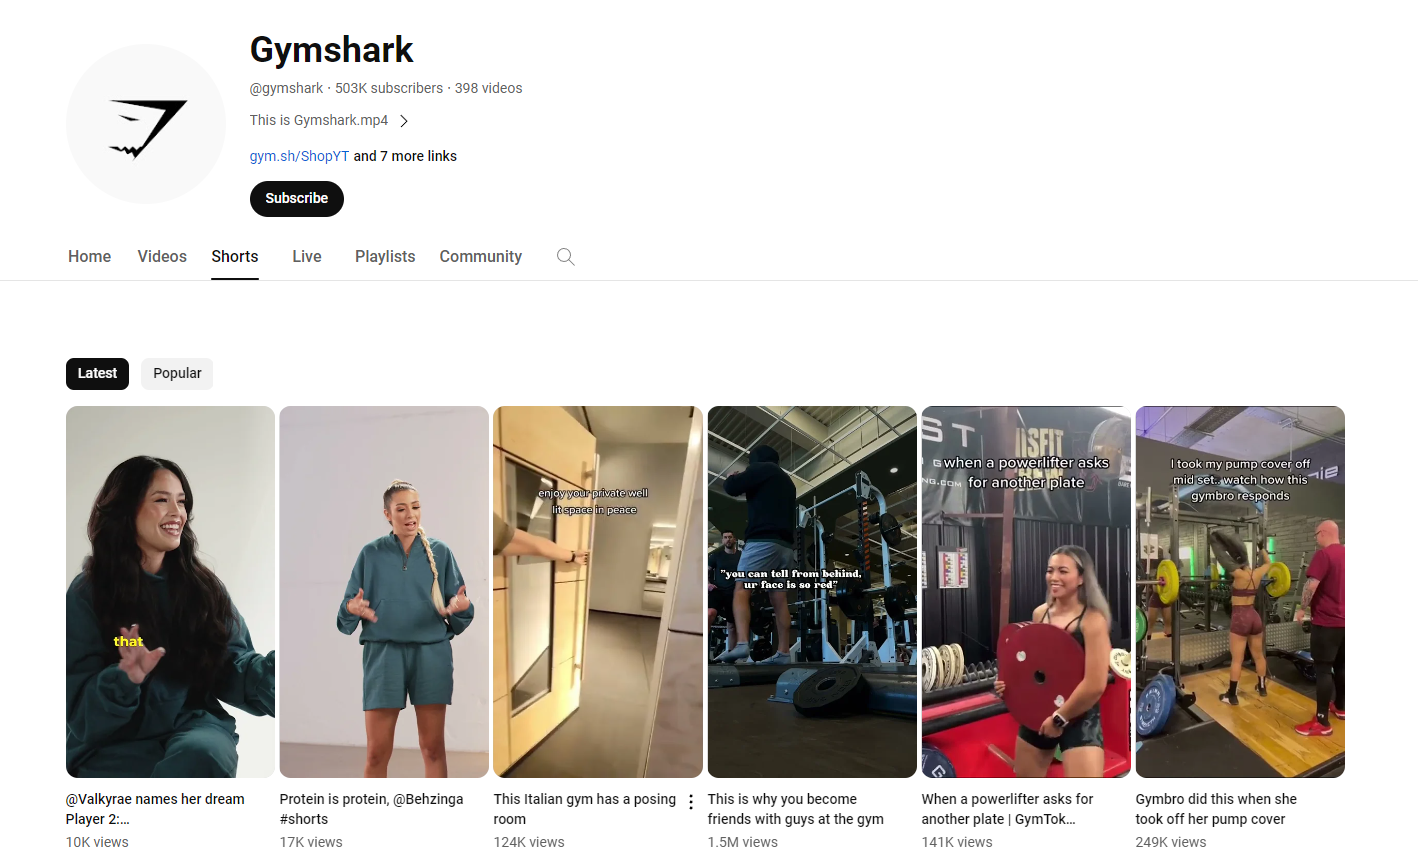 Gymshark on LinkedIn: Our values are so important to us at